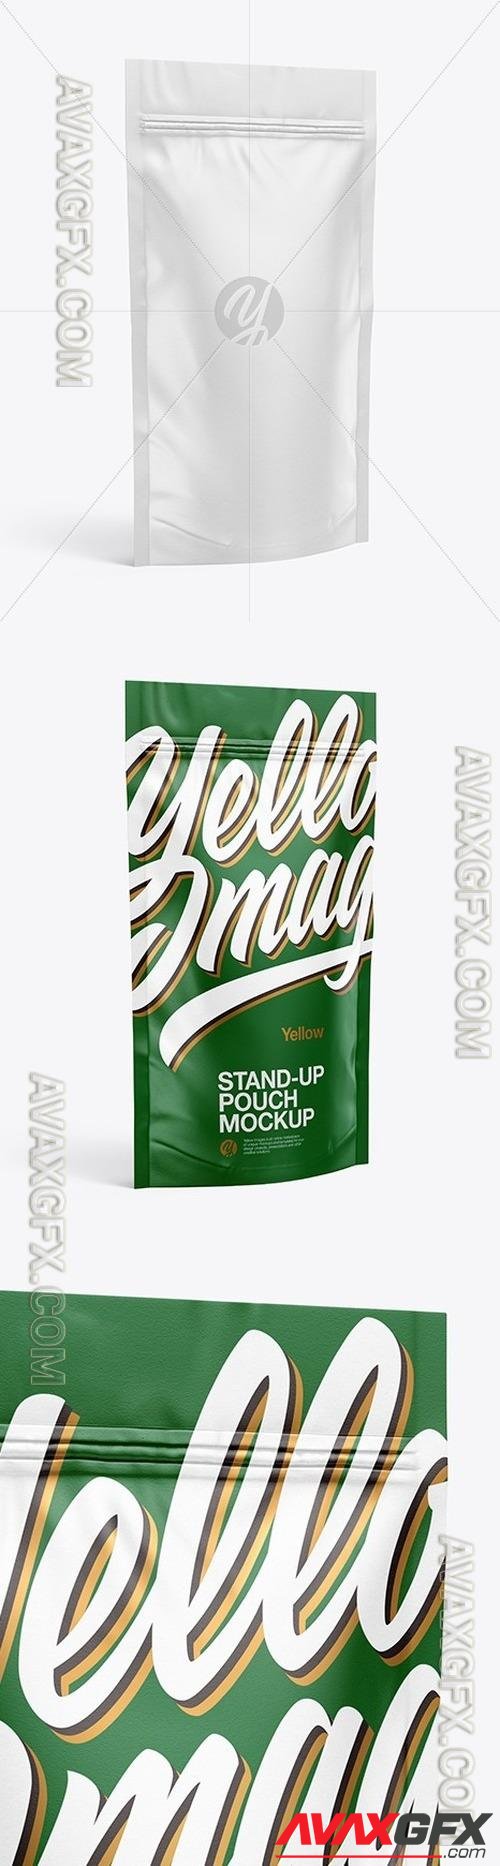 Paper Stand-Up Pouch Mockup 49990 TIF